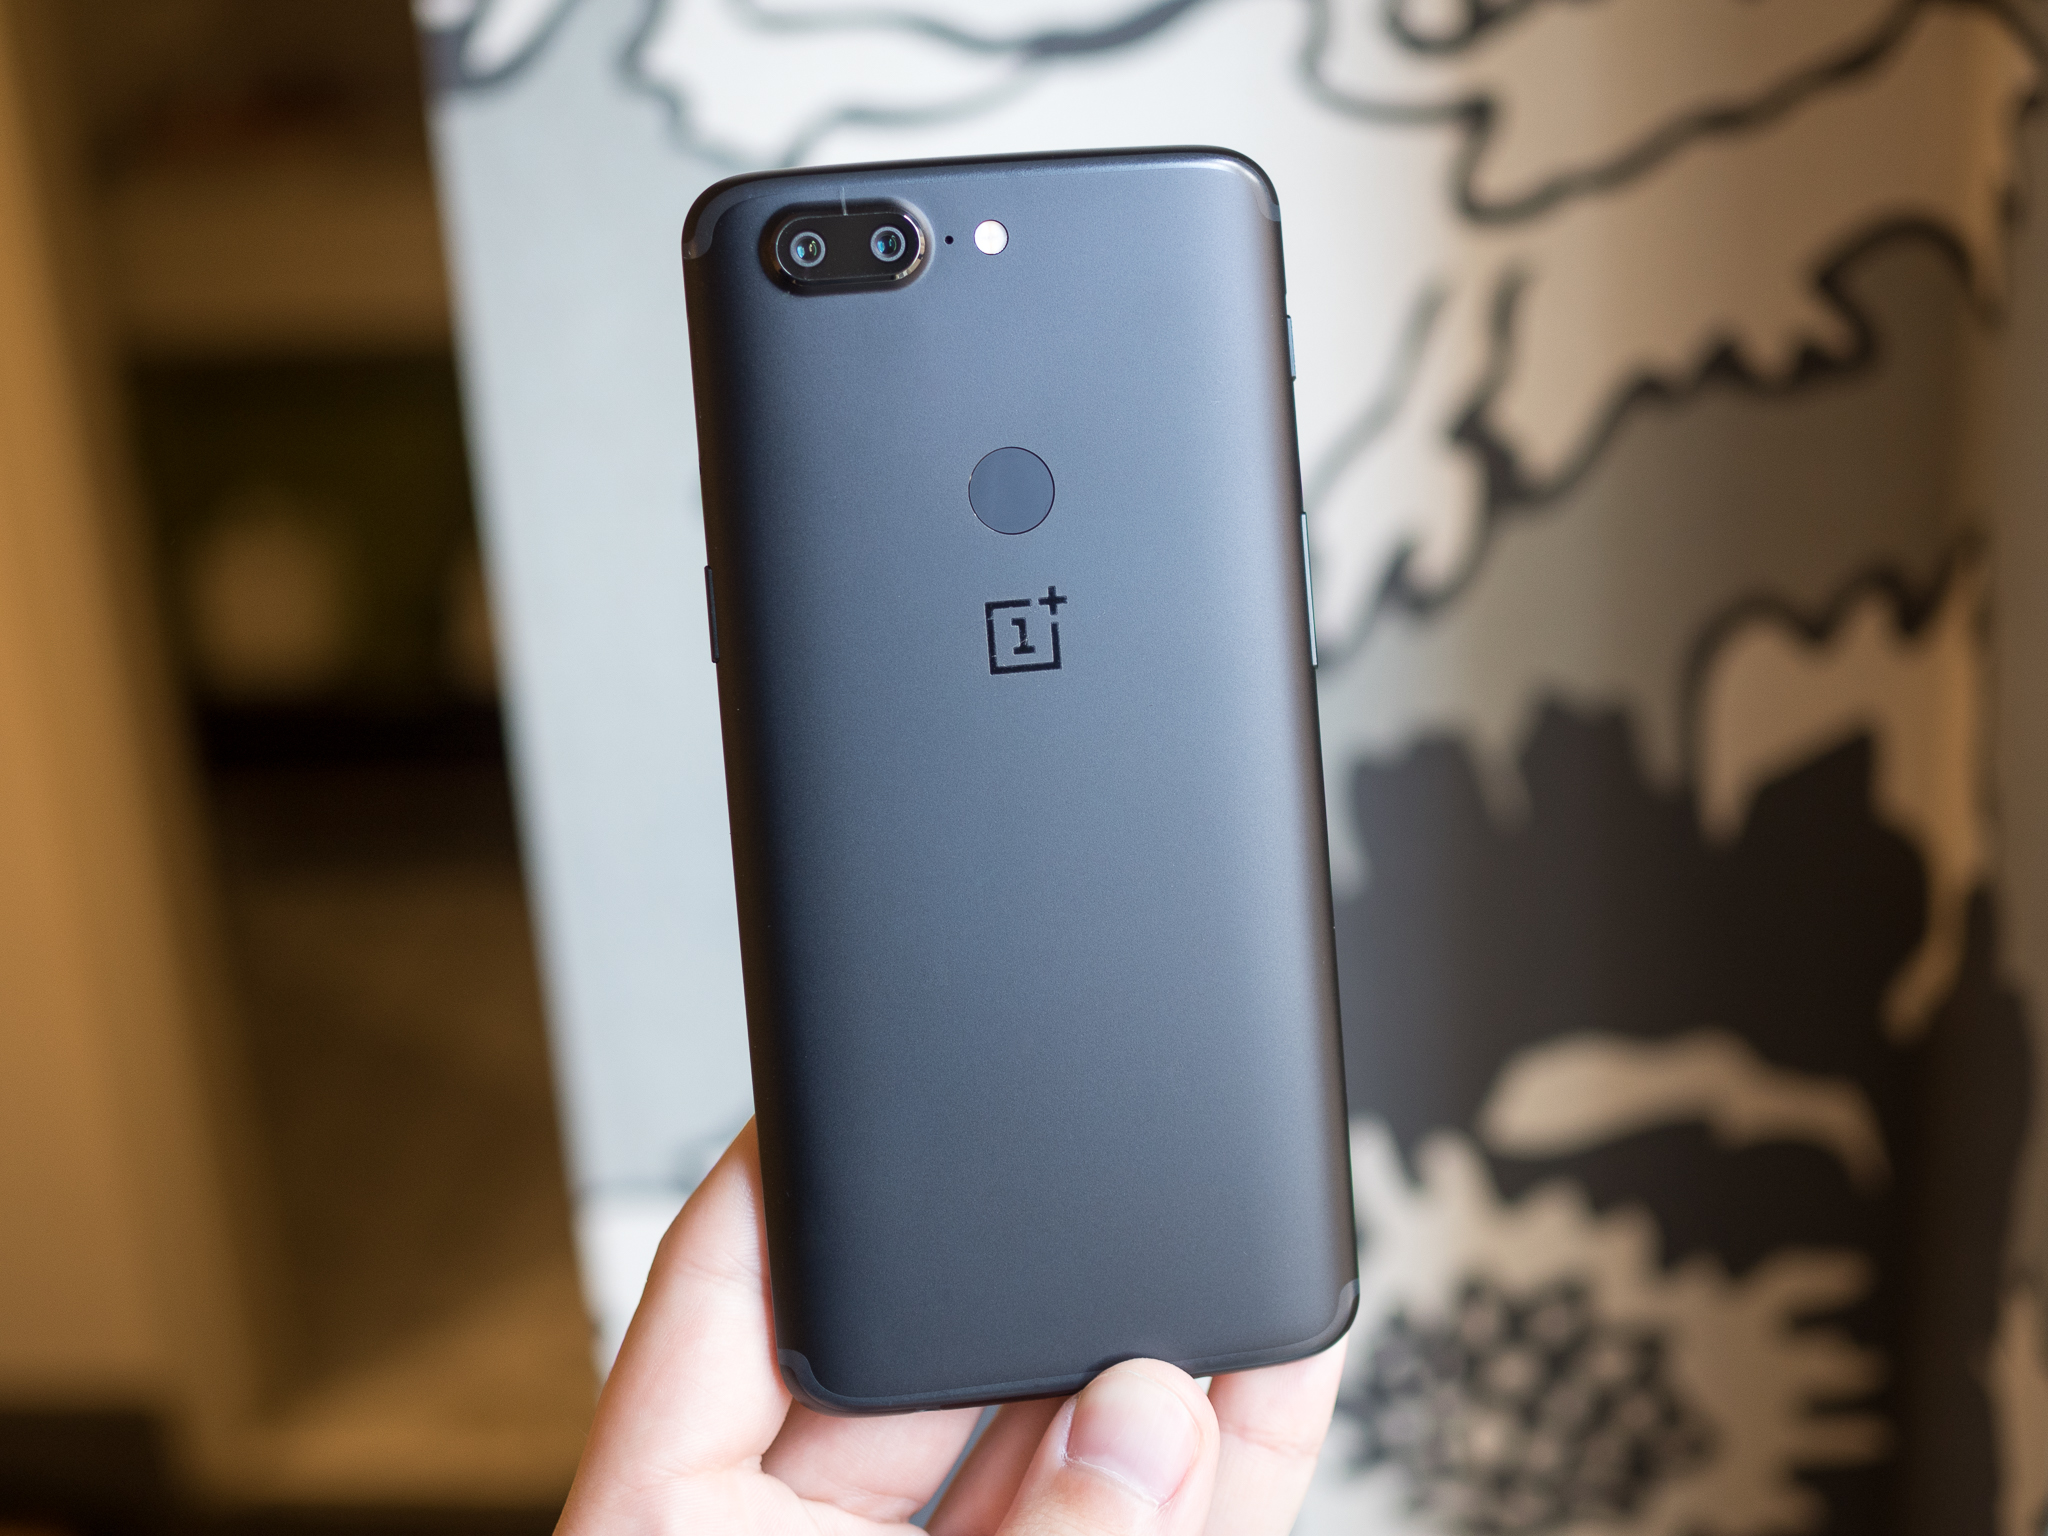 Dark wallpapers for OnePlus 5T for Amoled Display - Without Scrolling